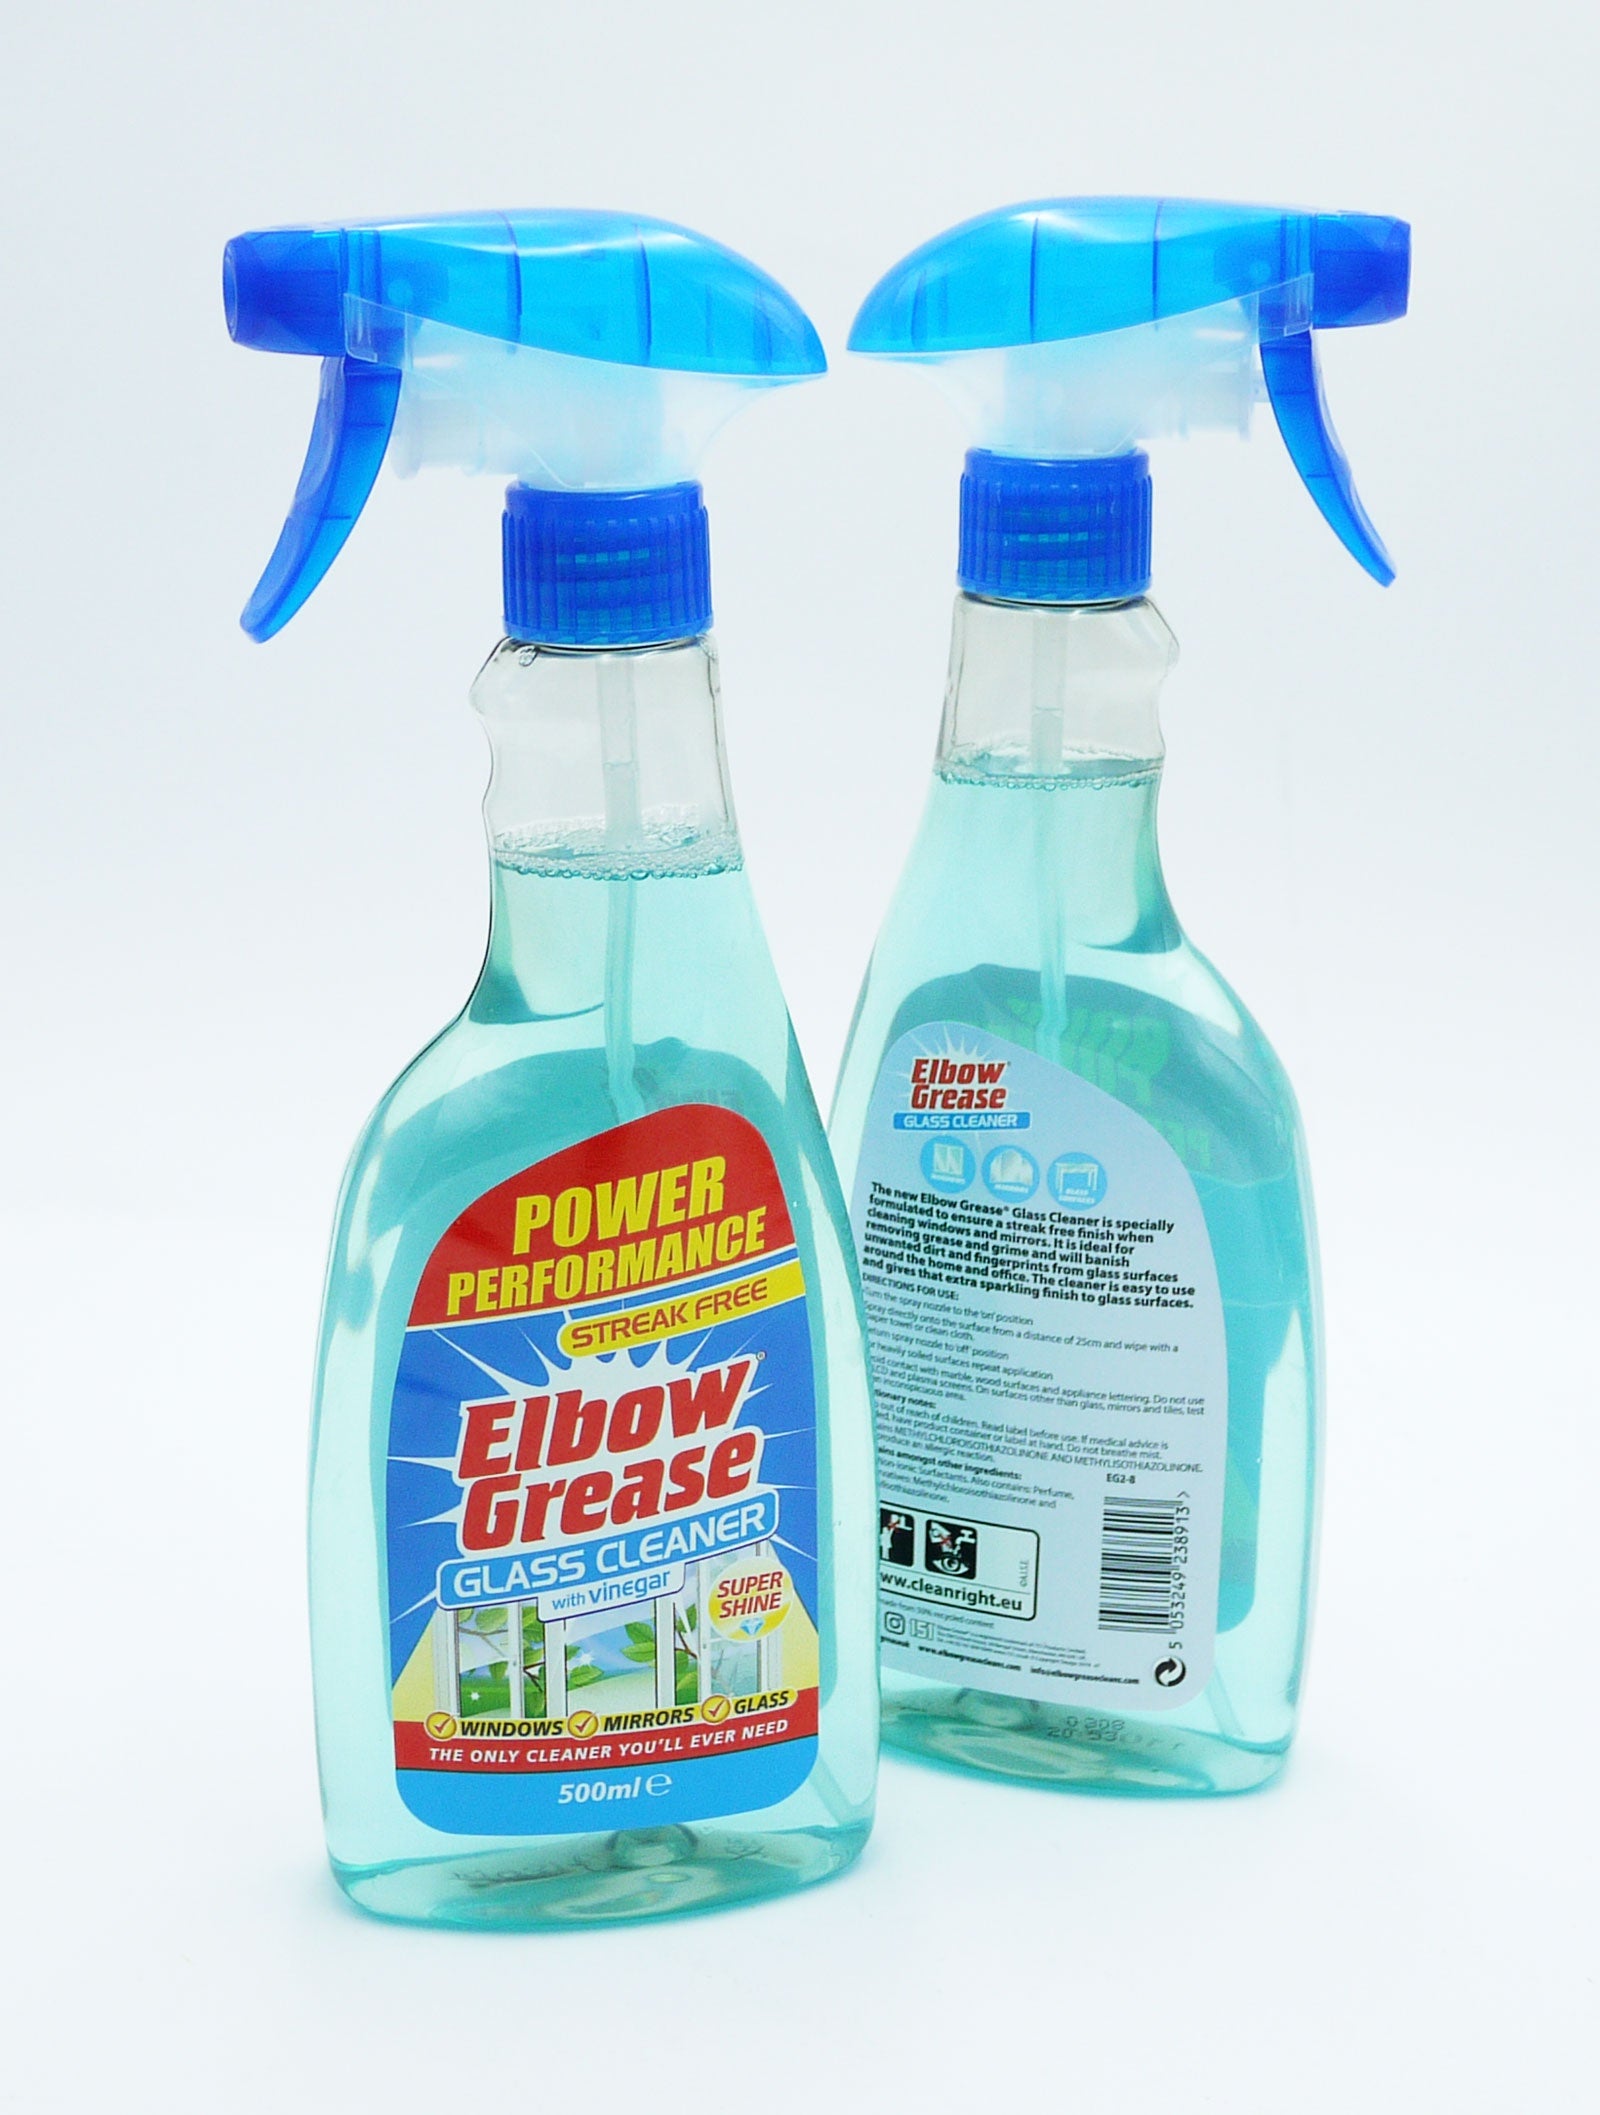 Elbow Grease Glass Cleaner 500ml*